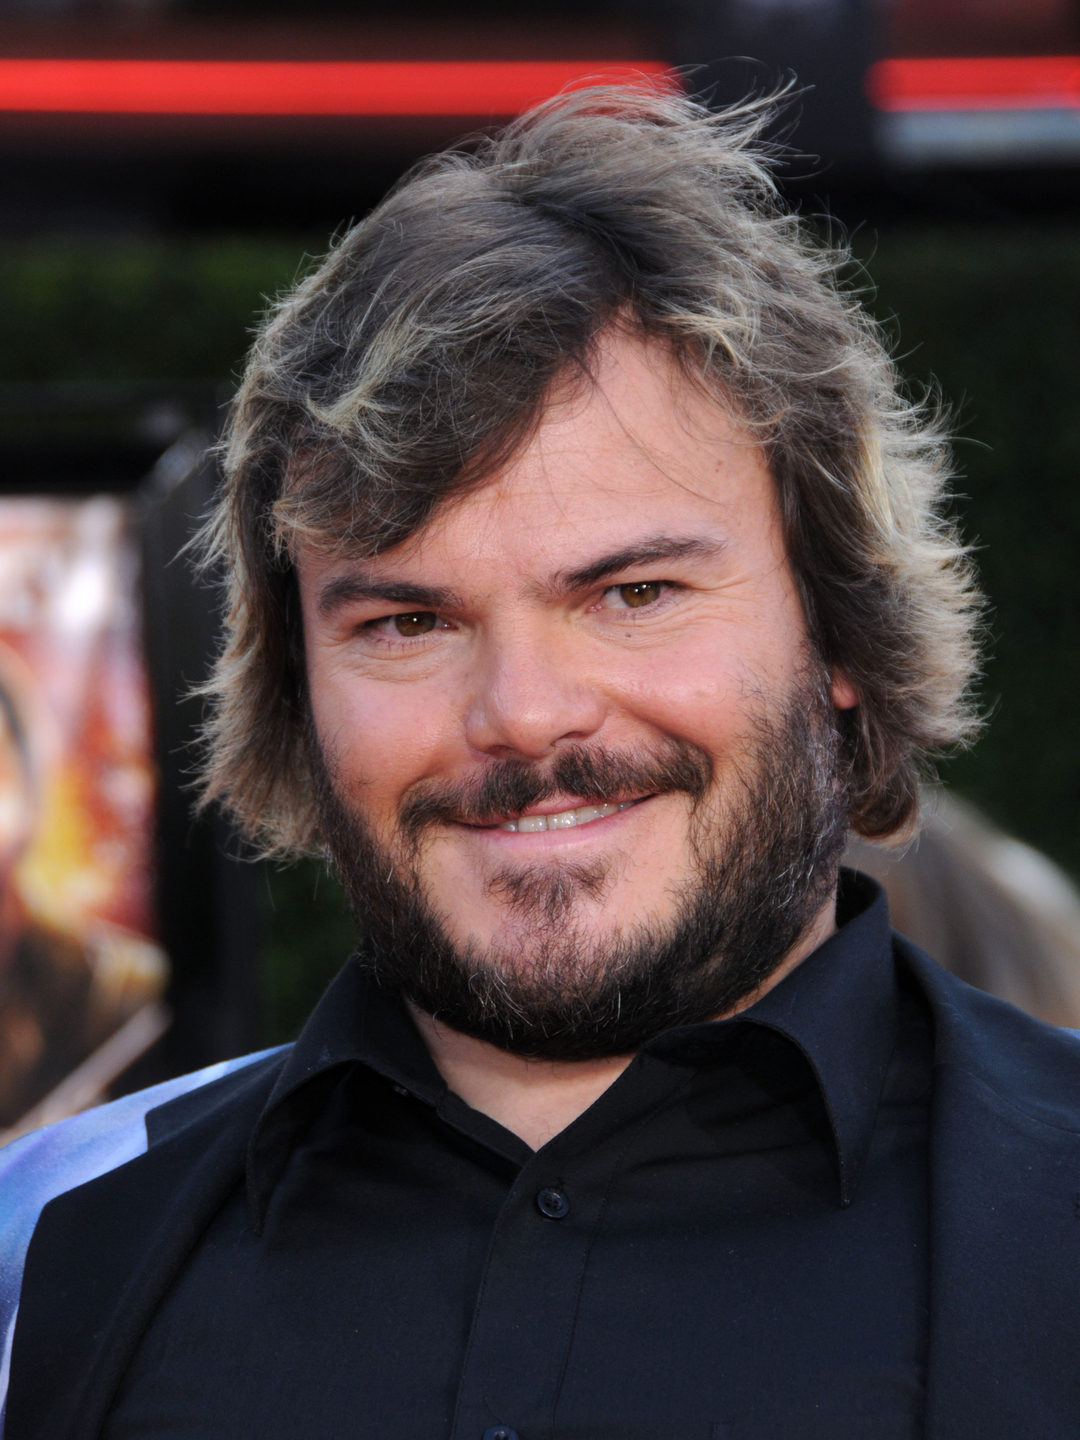 Jack Black in his youth